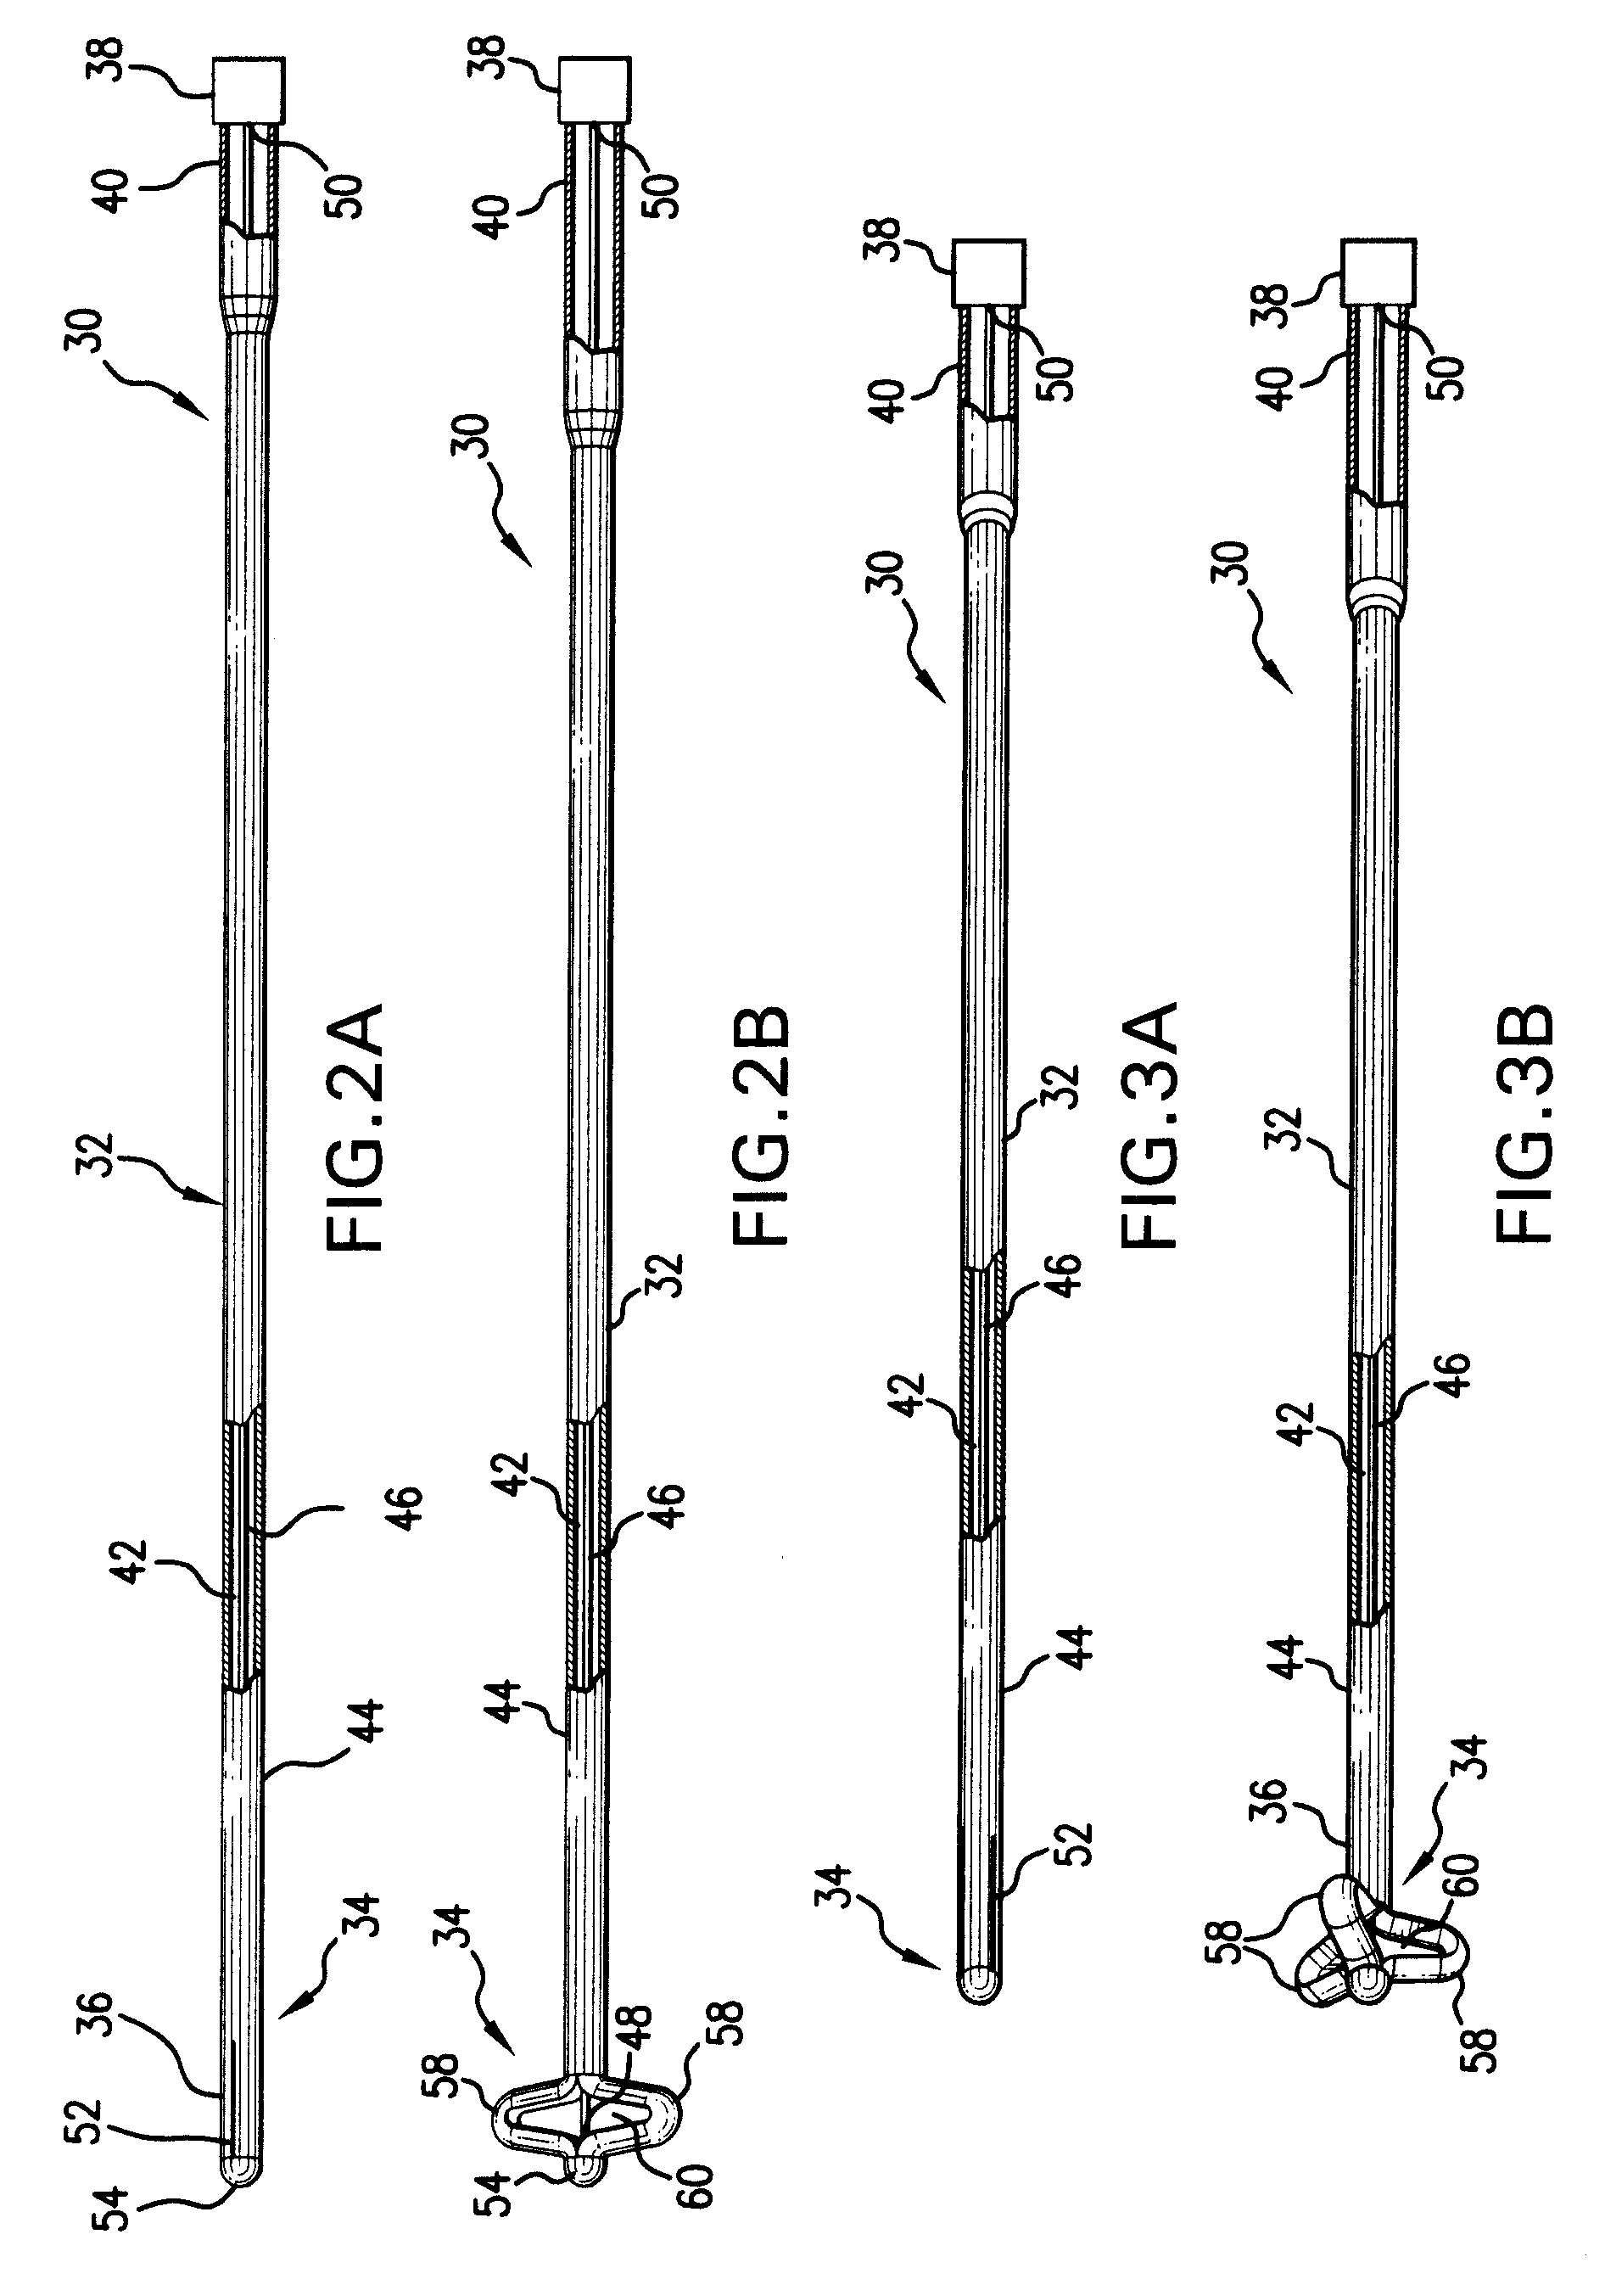 Indwelling urinary catheter with self-retaining mechanism